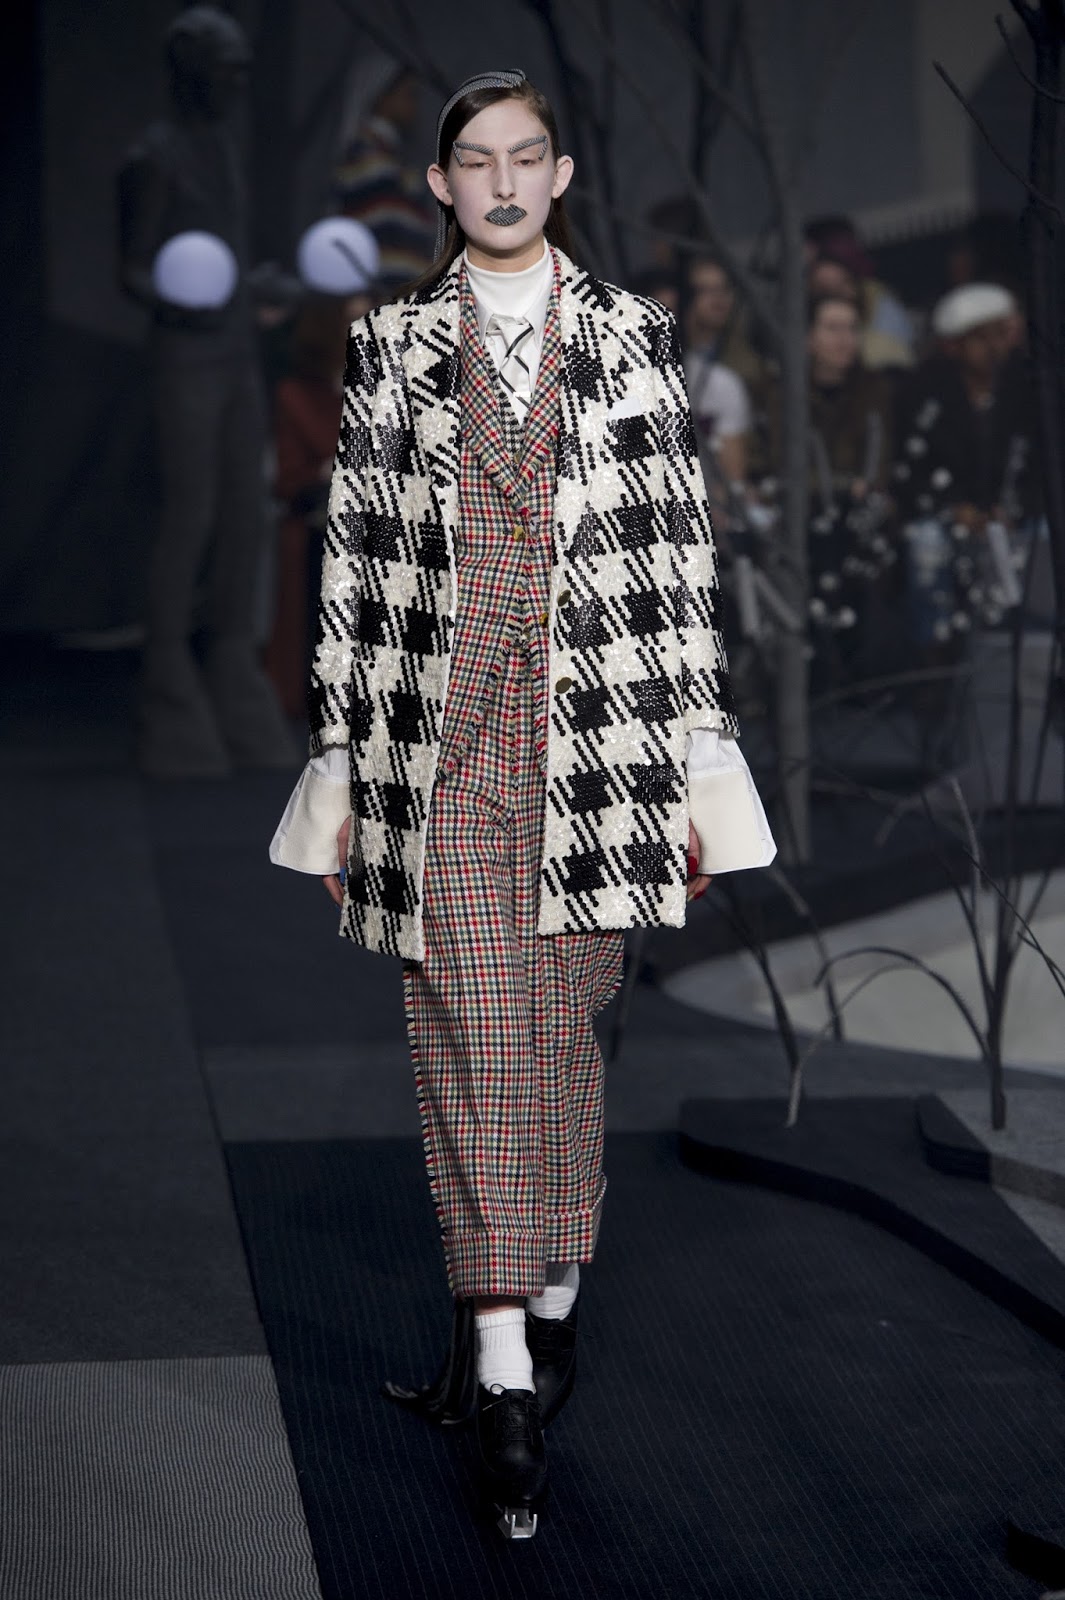 On another level:THOM BROWNE February 17, 2017 | ZsaZsa Bellagio - Like ...